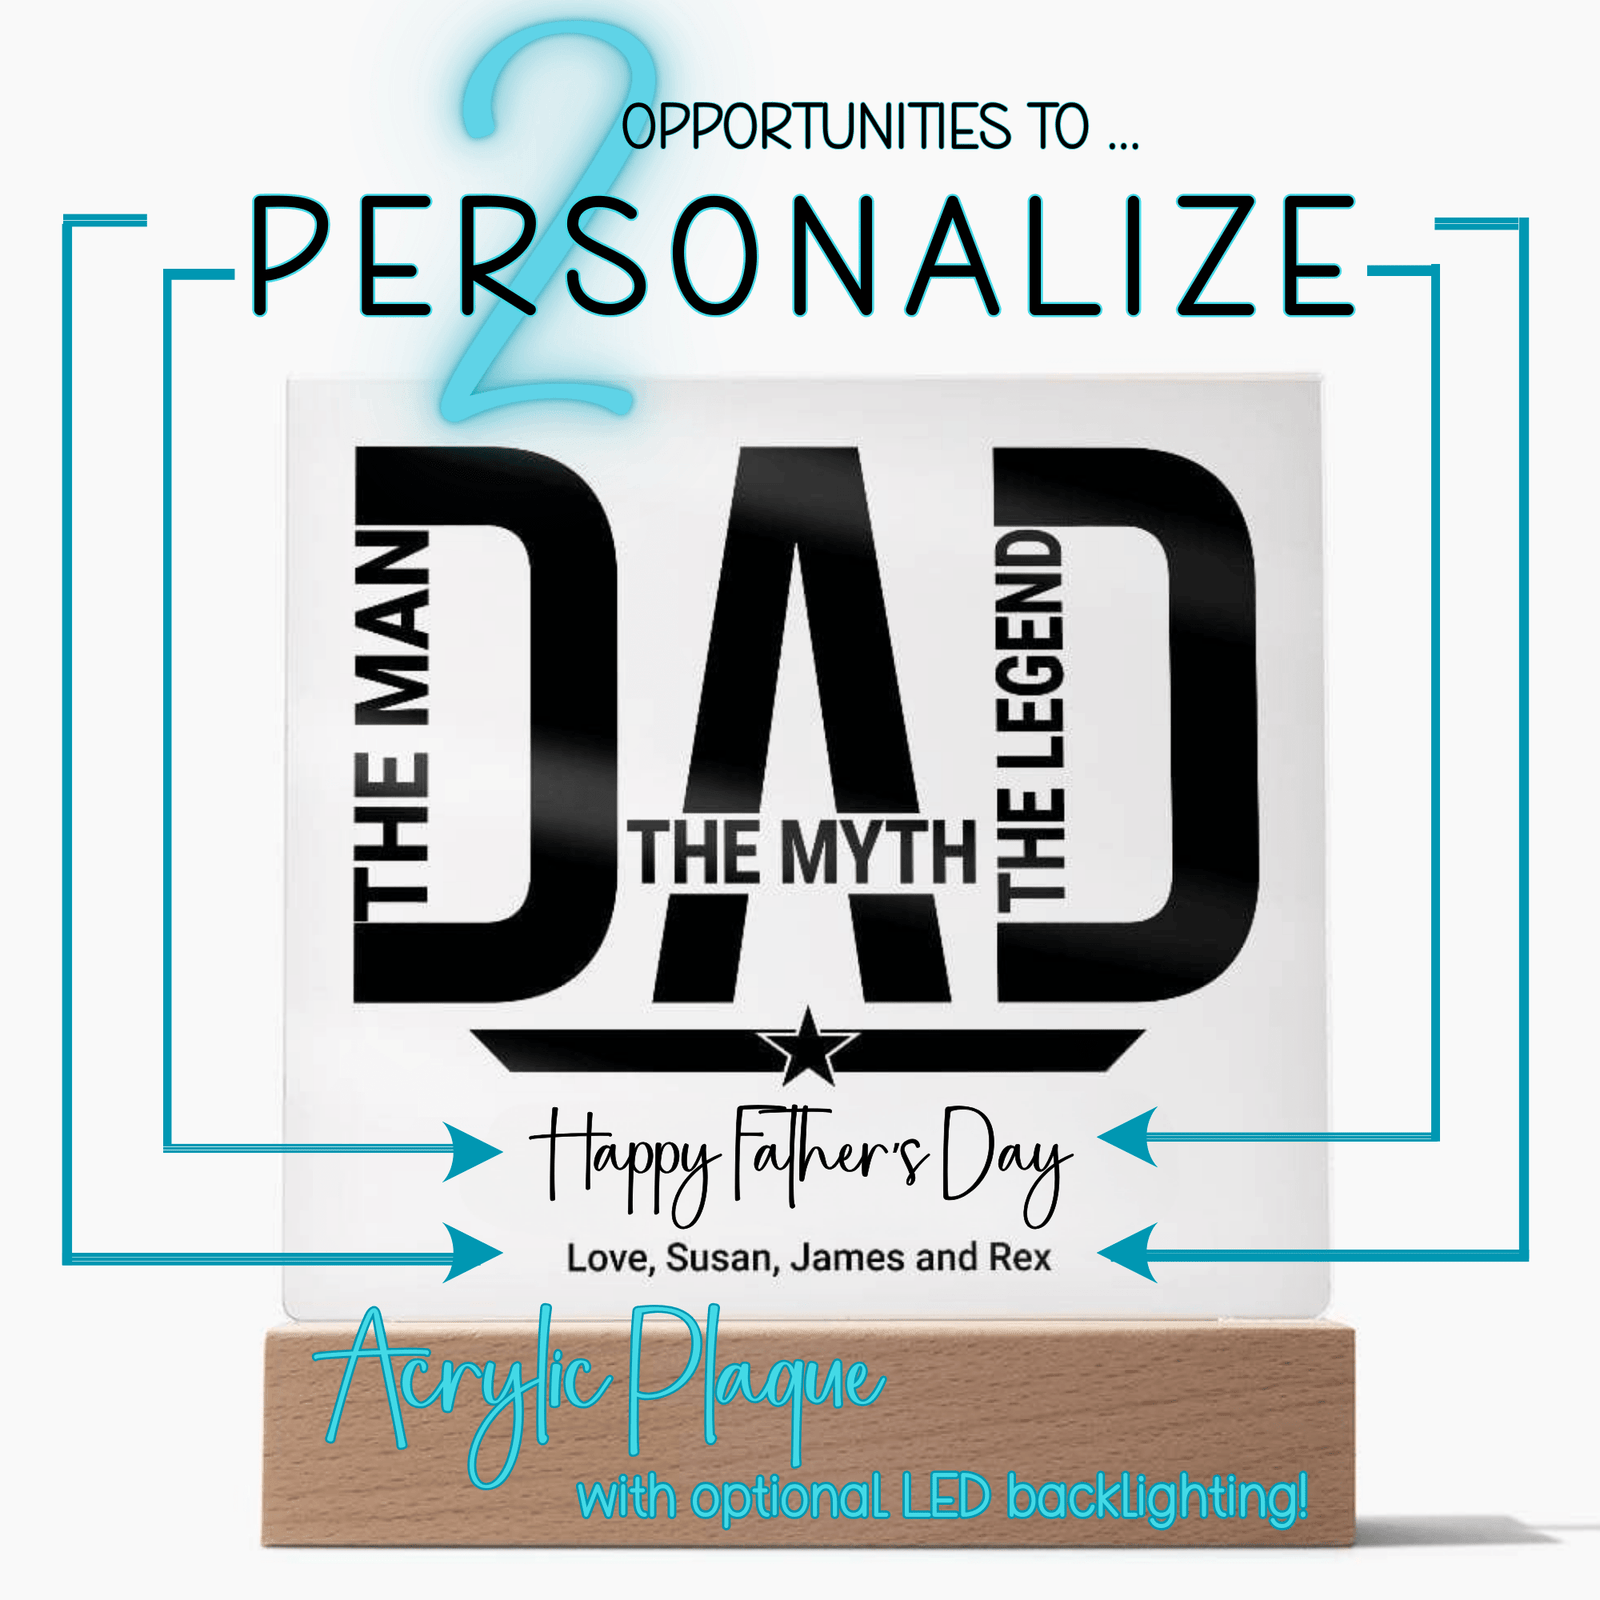 DAD - THE MAN, THE MYTH, THE LEGEND | Square  Acrylic Plaque | PERSONALIZABLE for Birthdays, Father's Day or Other